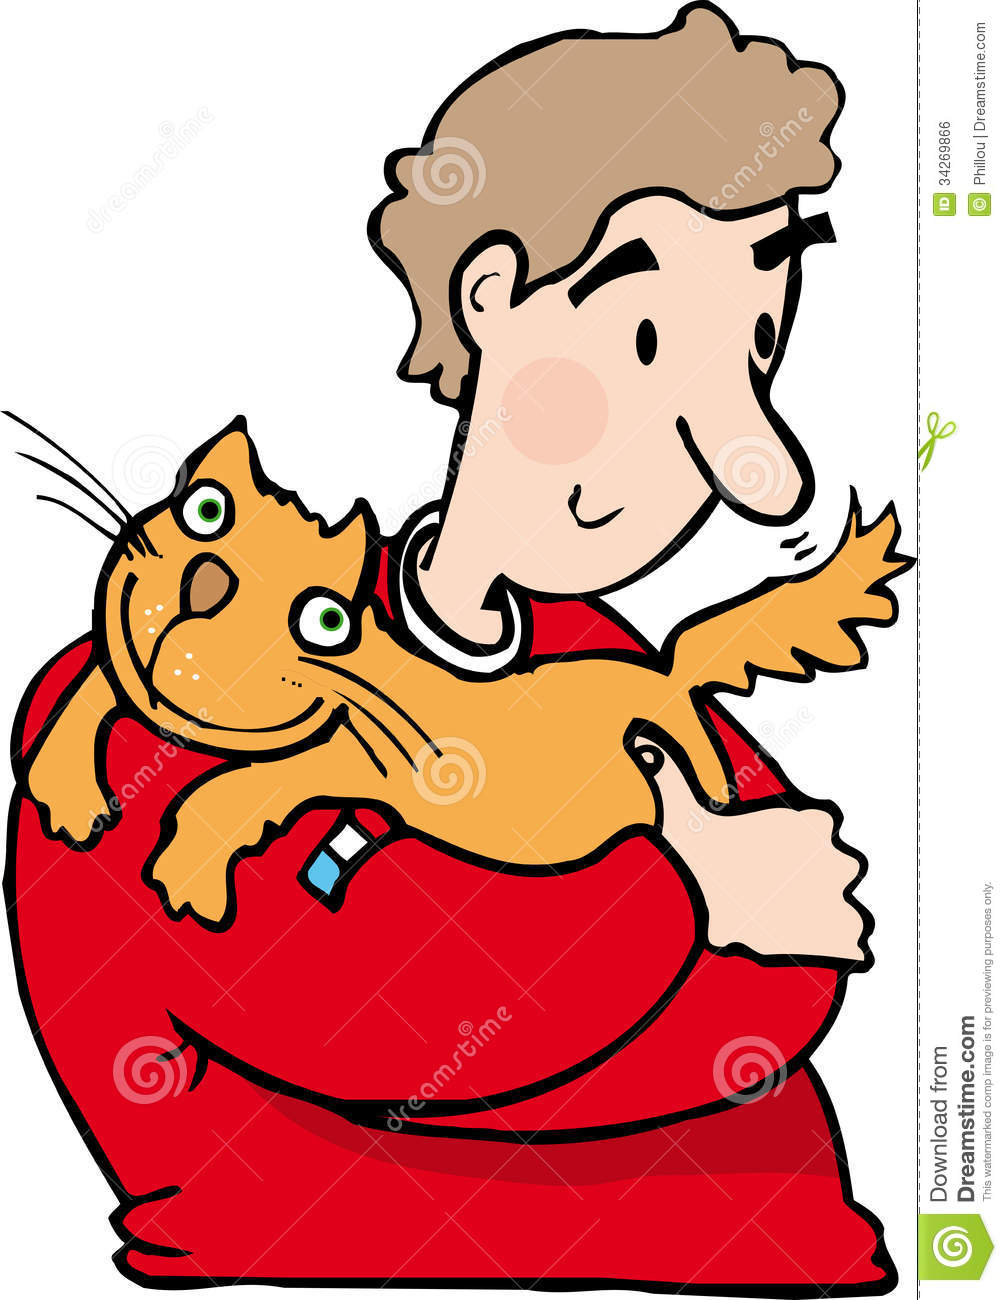 Man with cat stock vector. Illustration of holding